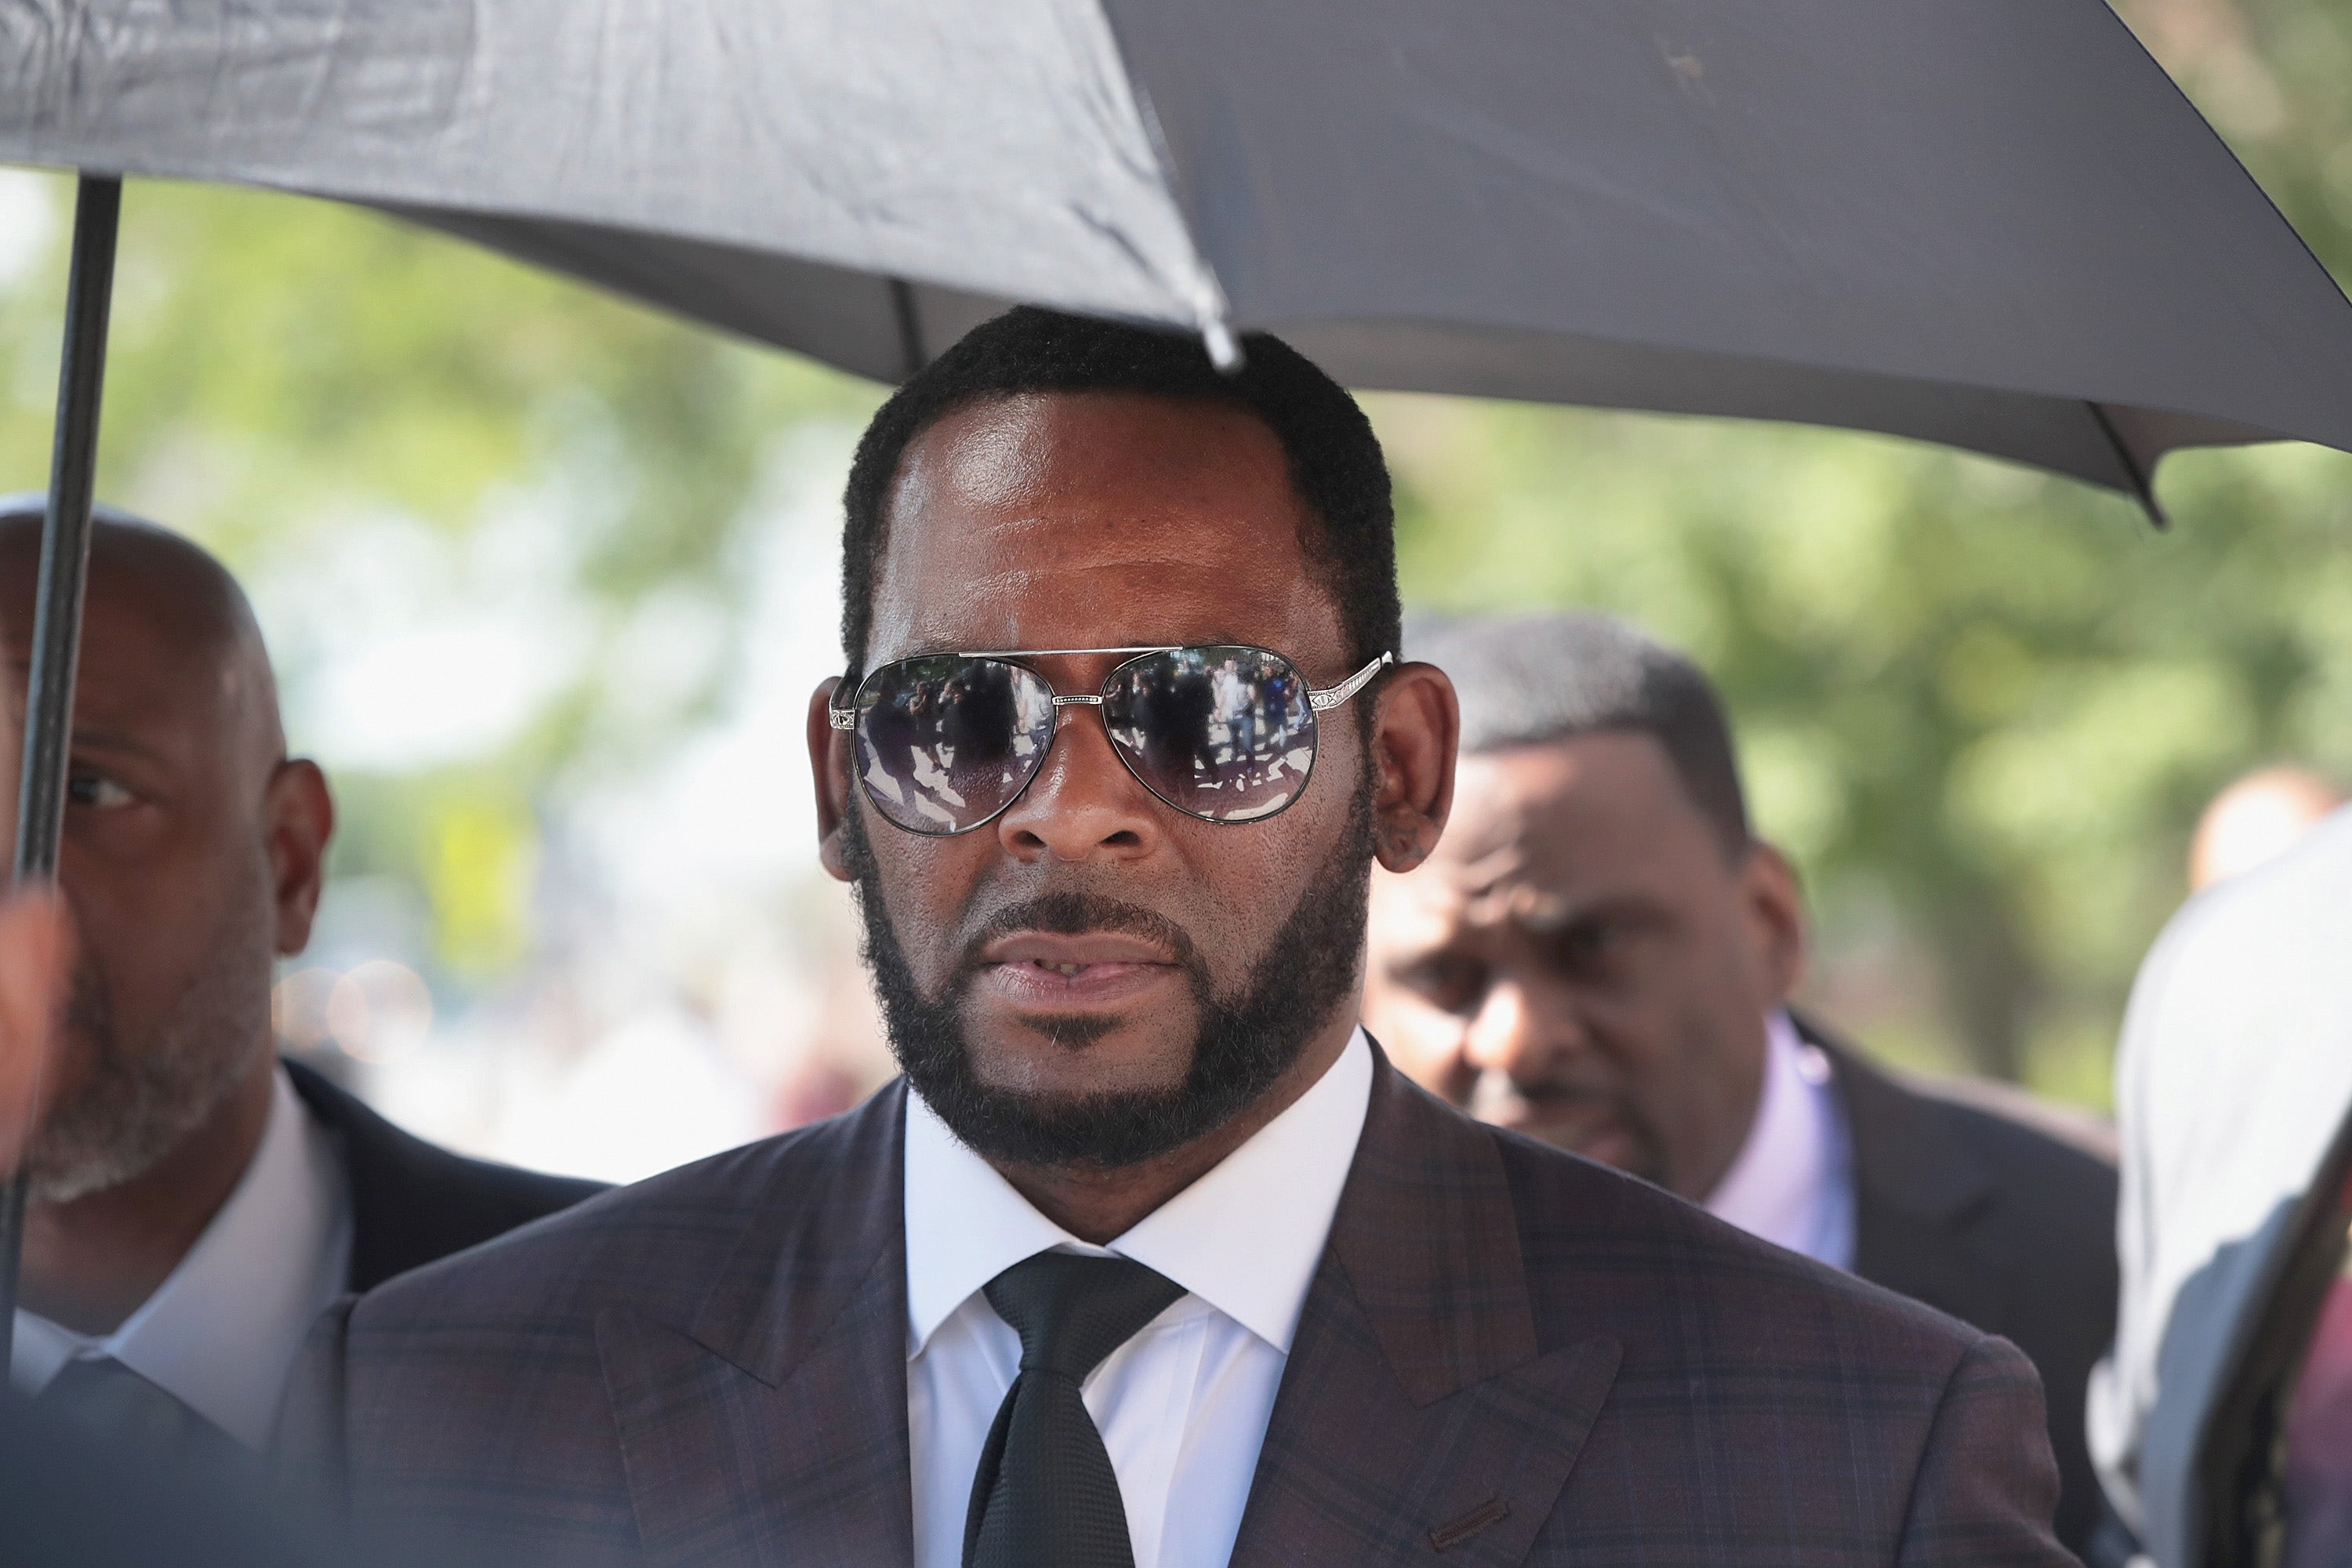 ‘Unauthorized’ album of bootleg R. Kelly music called ‘I Admit’ released on Spotify, Apple Music: lawyer